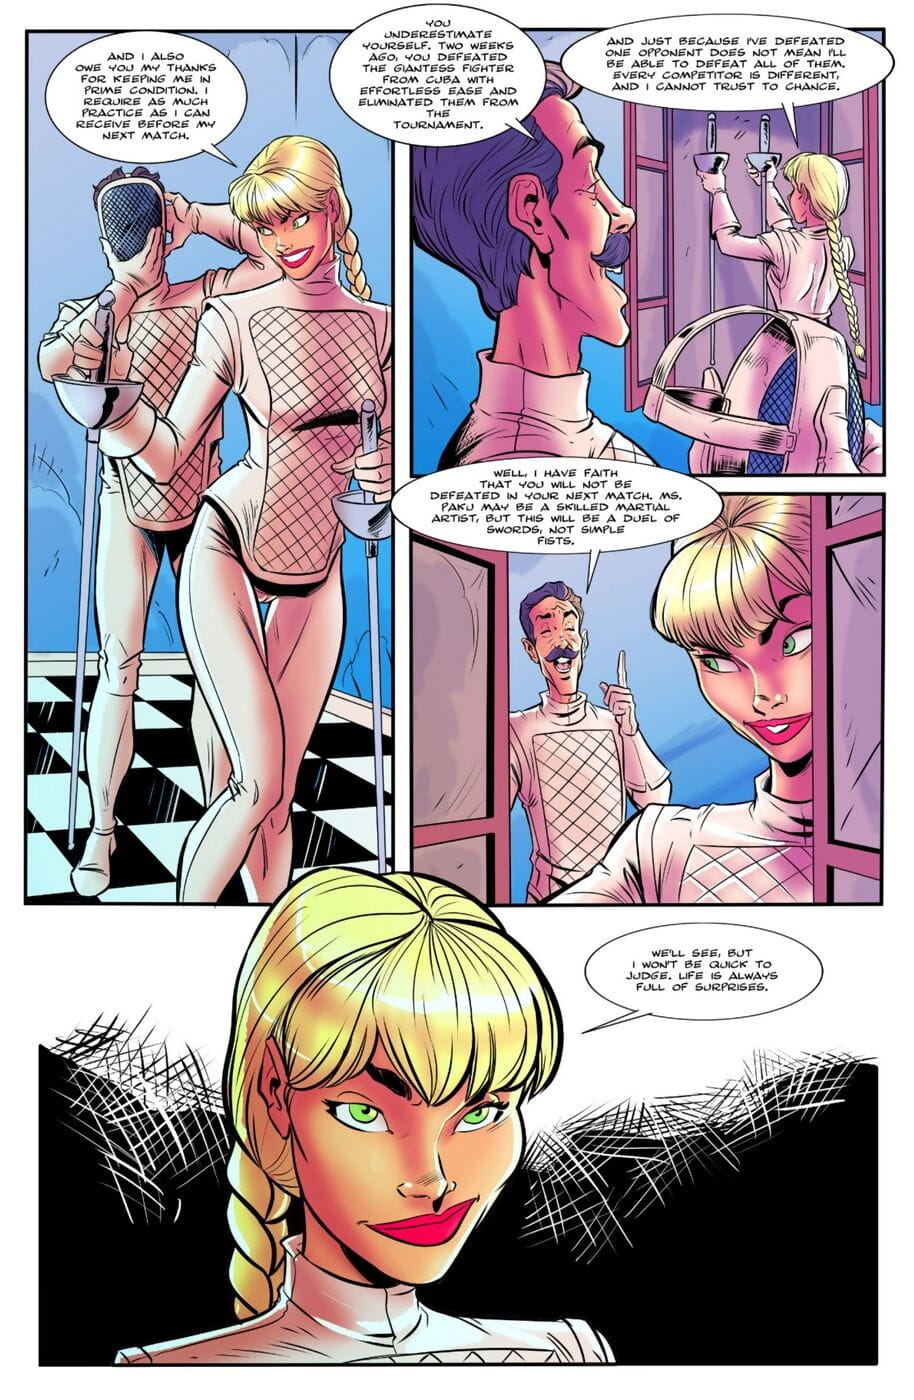 Bot- Giantess Fight Issue 3 page 1